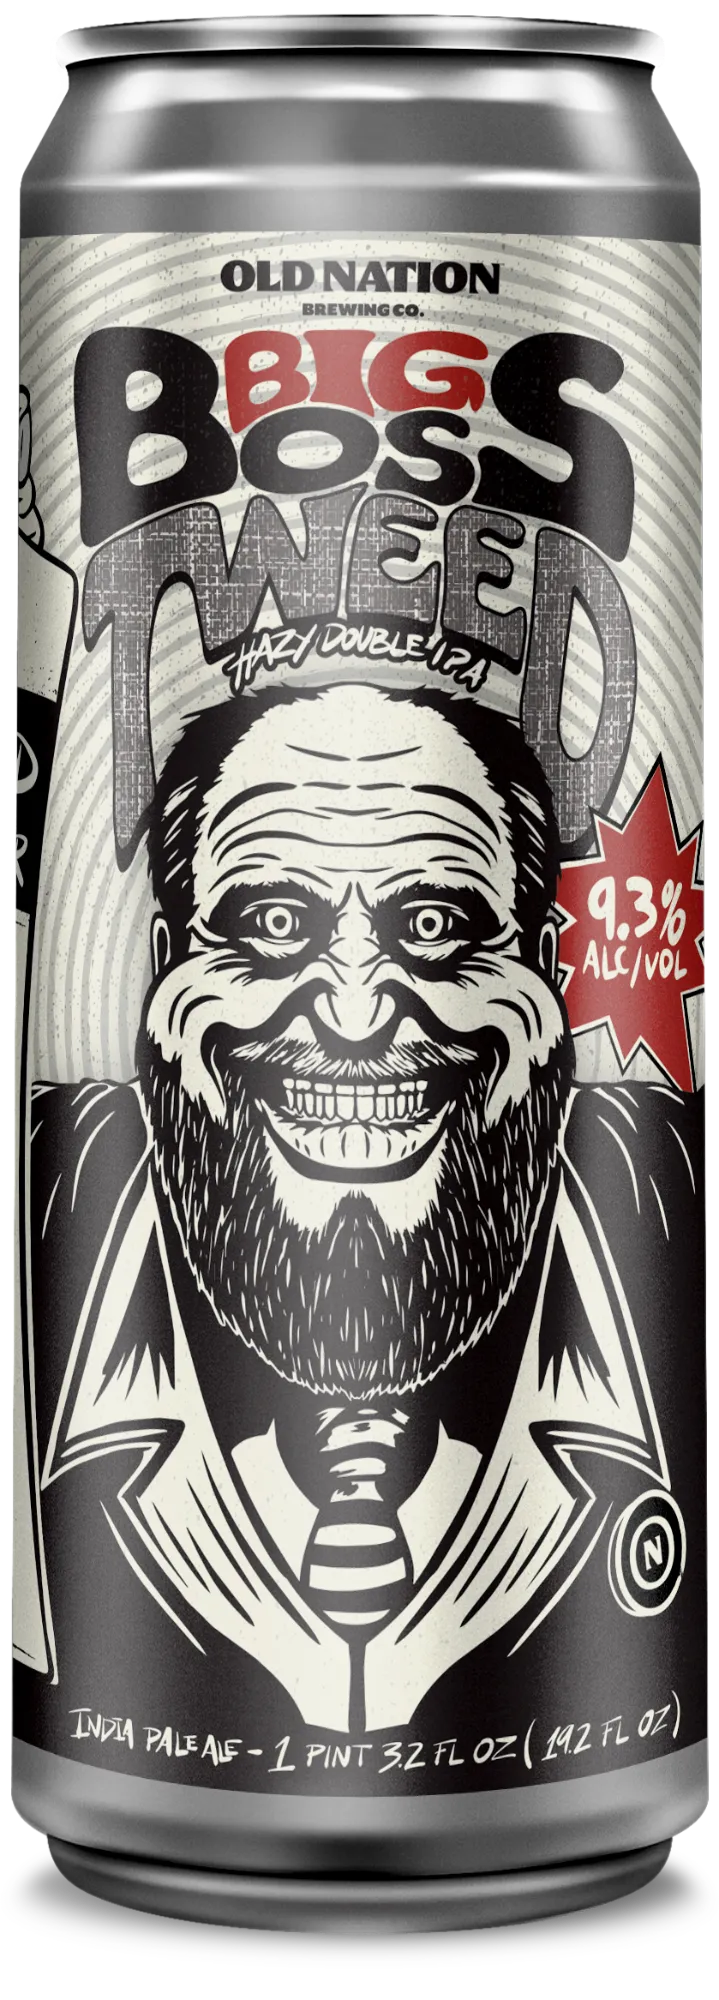 Big Boss Tweed beer by Old Nation in a 19.2oz Can. Illustration of a balding man smiling